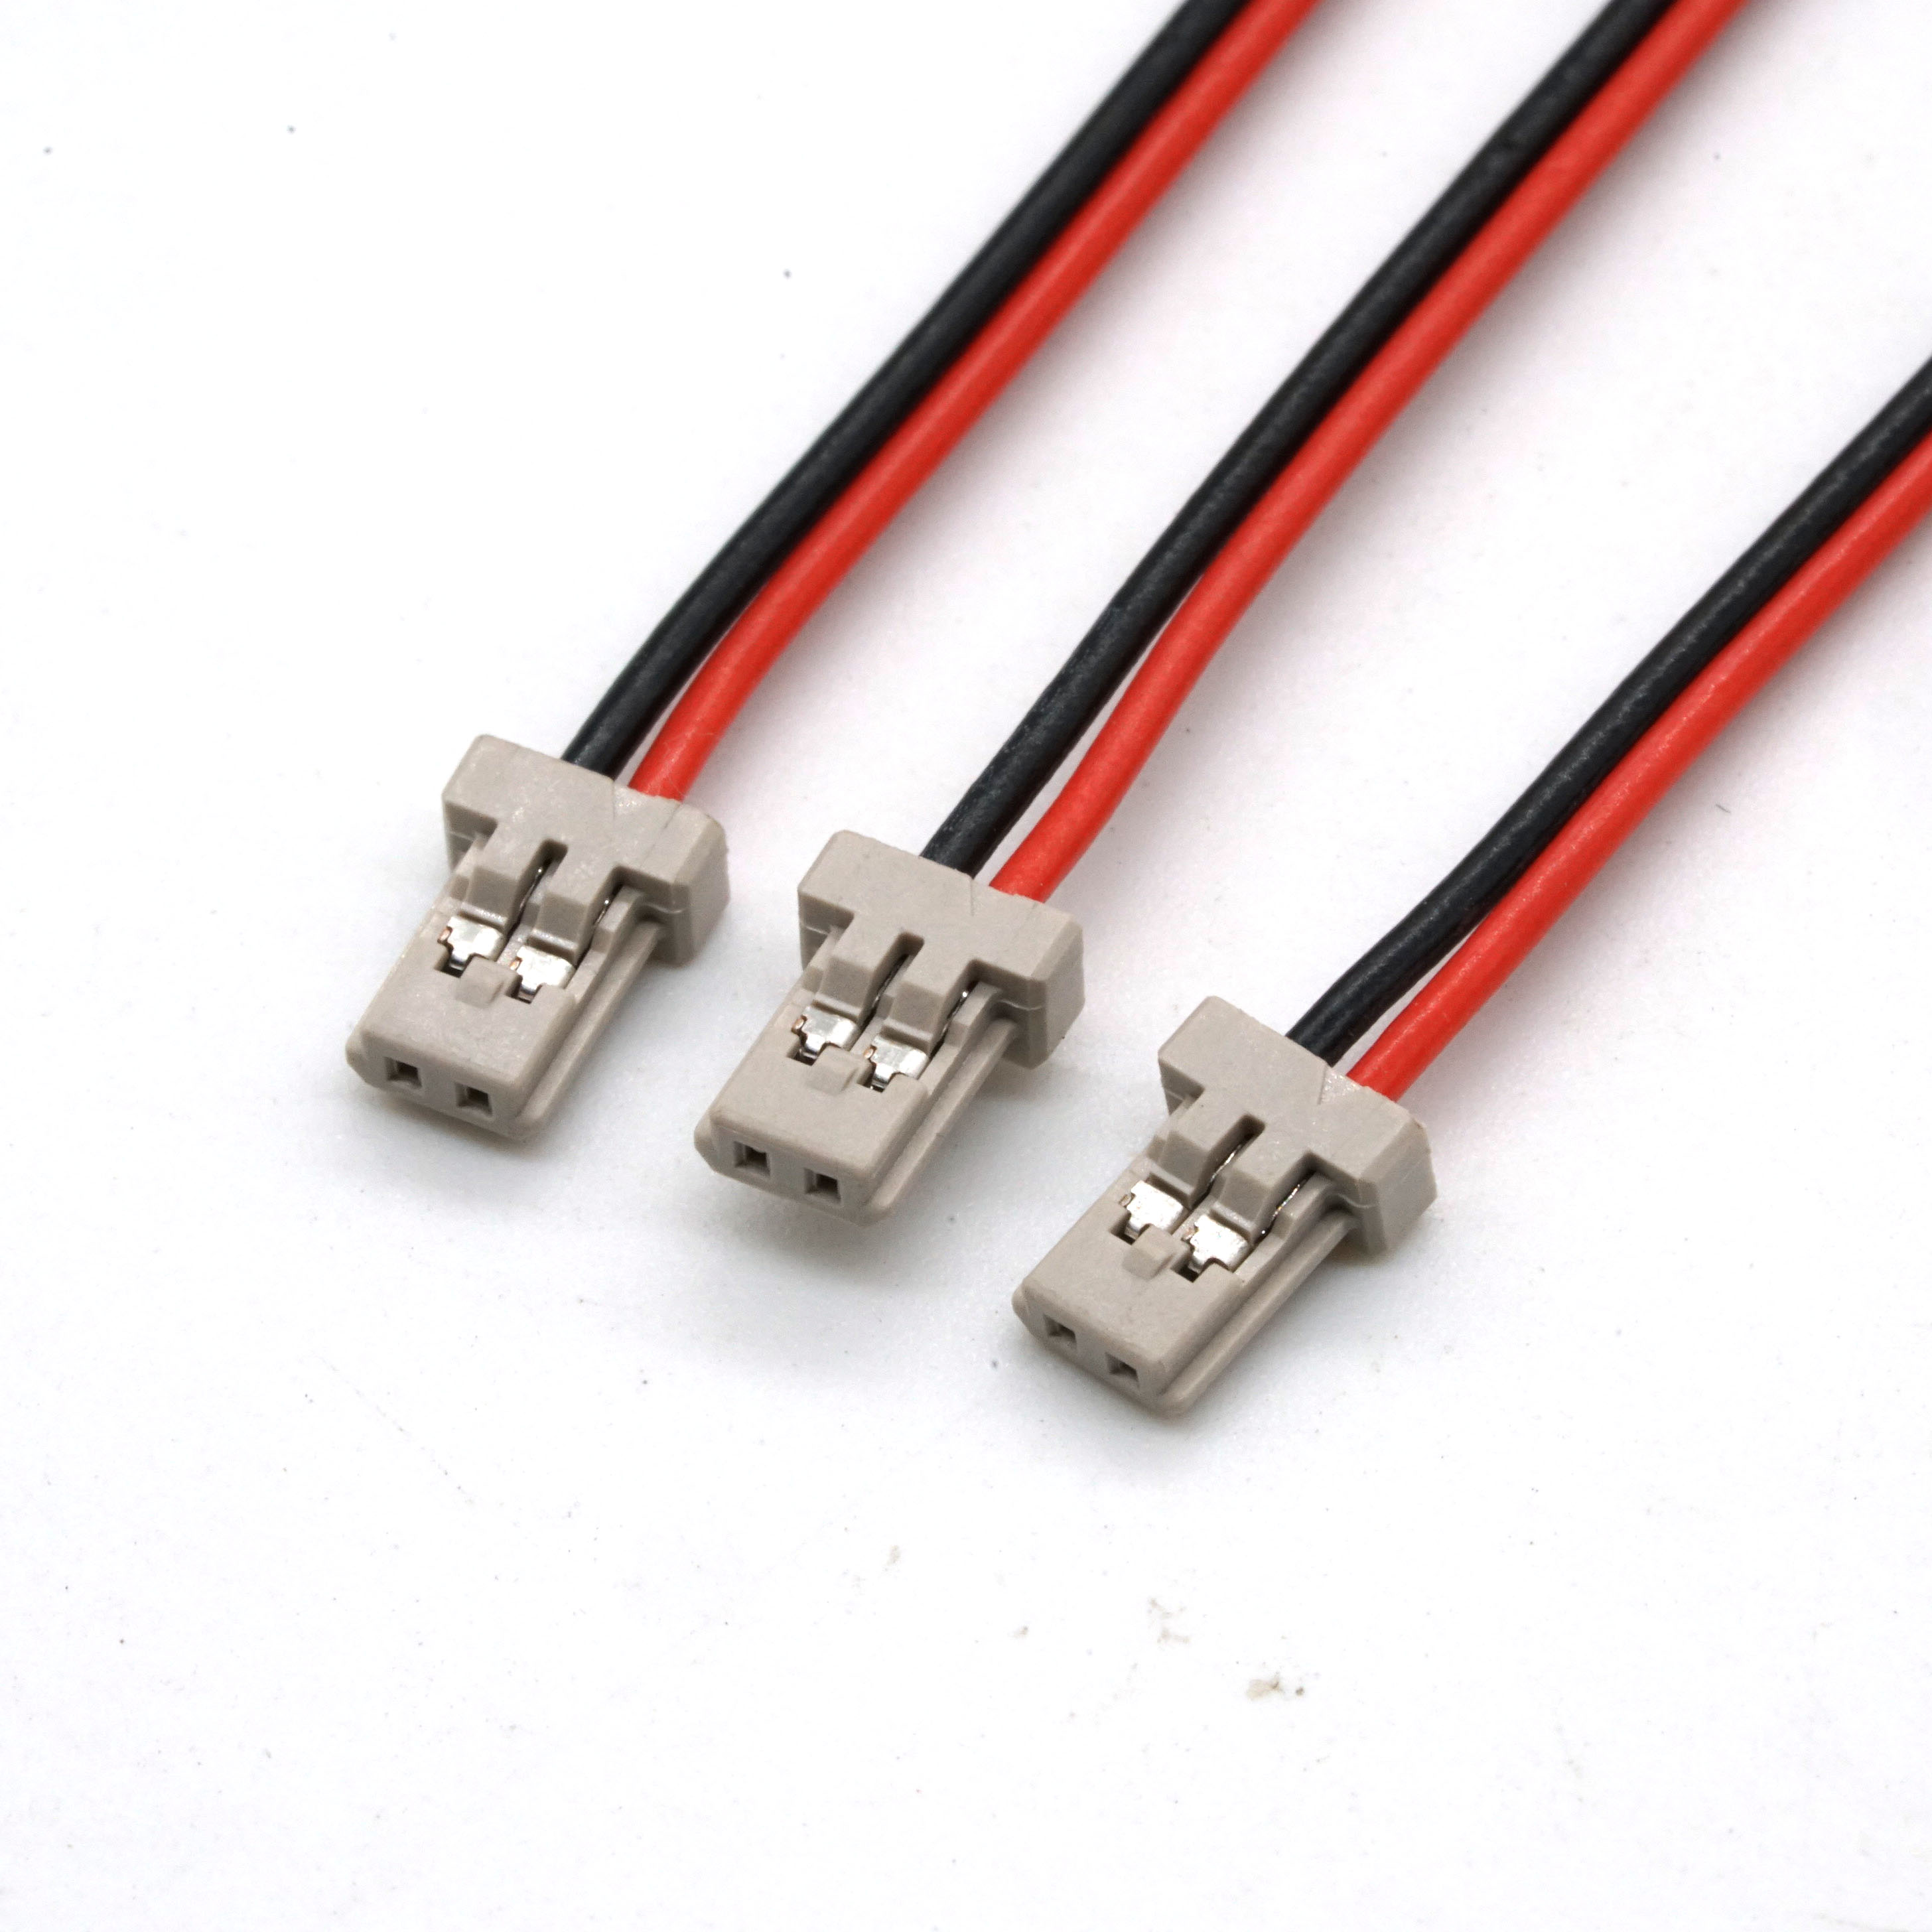 DF13 2Pin 1.25mm connector 1571 28AWG filum phaleras LVDS cables conventus electrica productorum